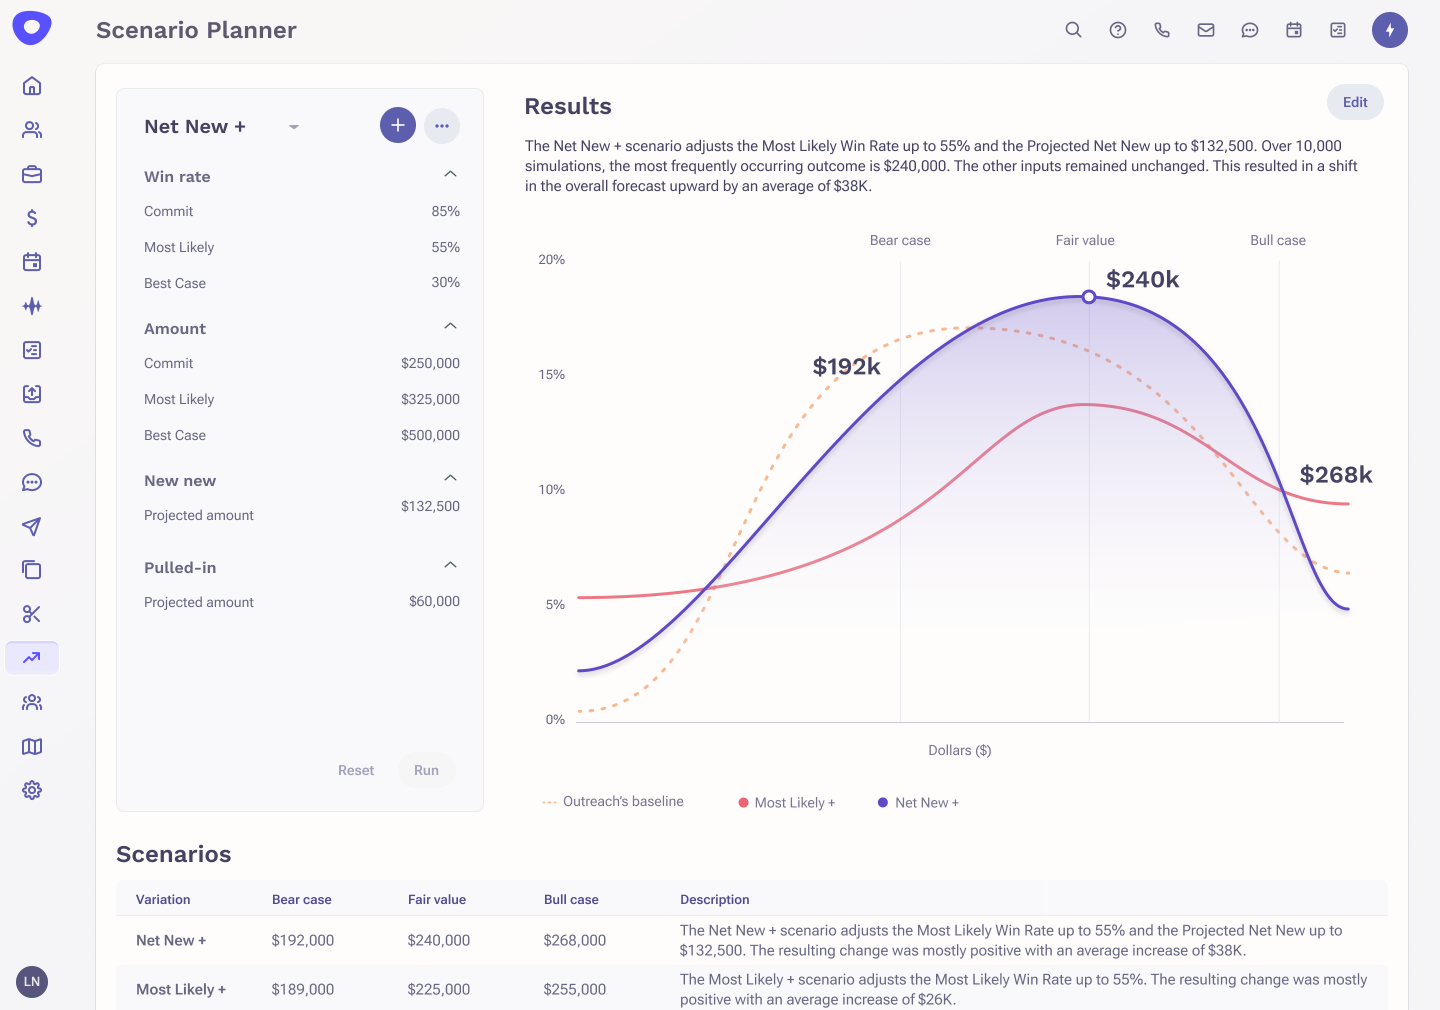 Scenario Planner dashboard by Outreach demonstrating AI-driven management of multiple forecasts, testing assumptions, and simulating various revenue outcomes